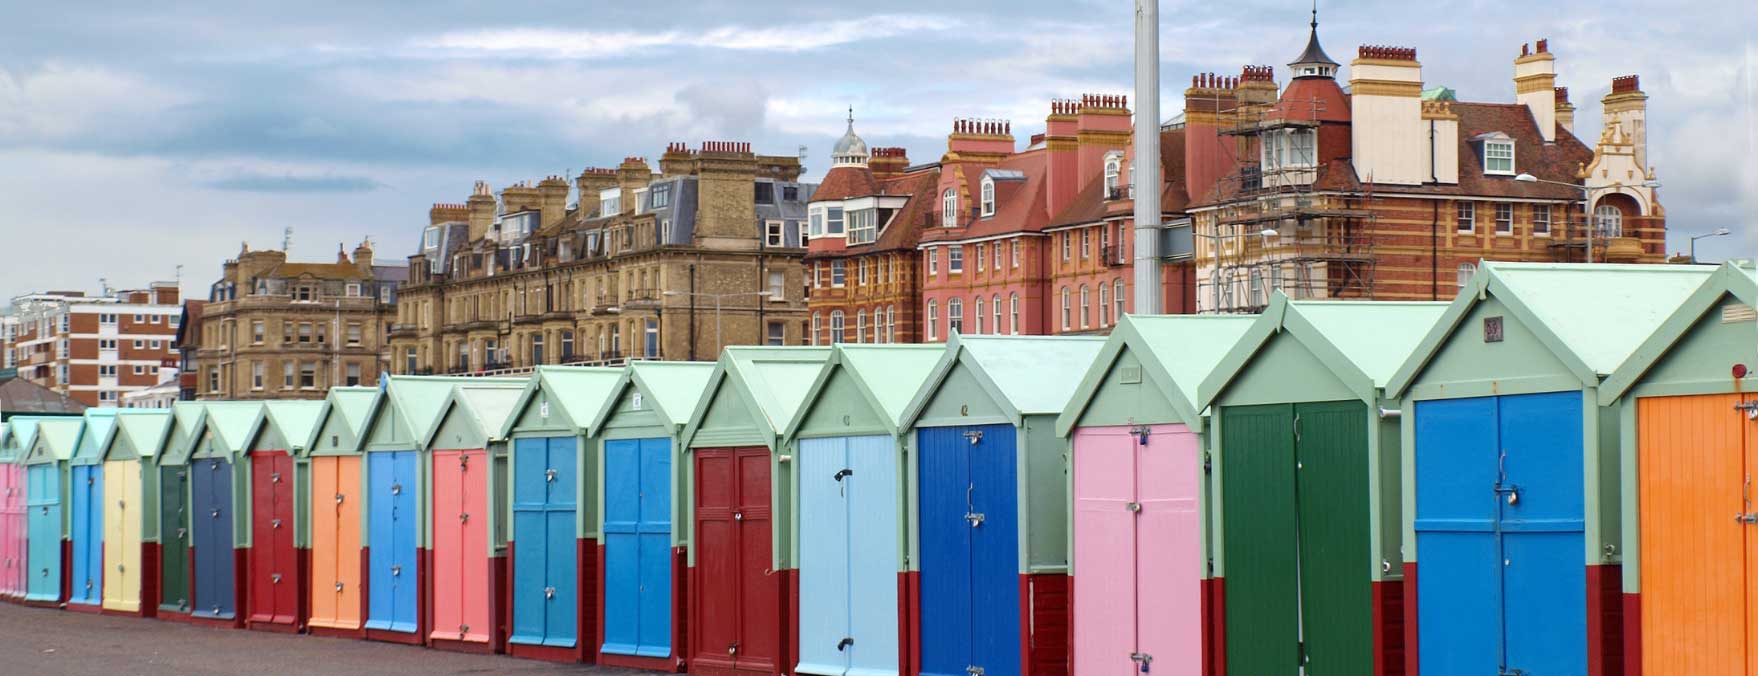 Hove beach huts seafront colourful